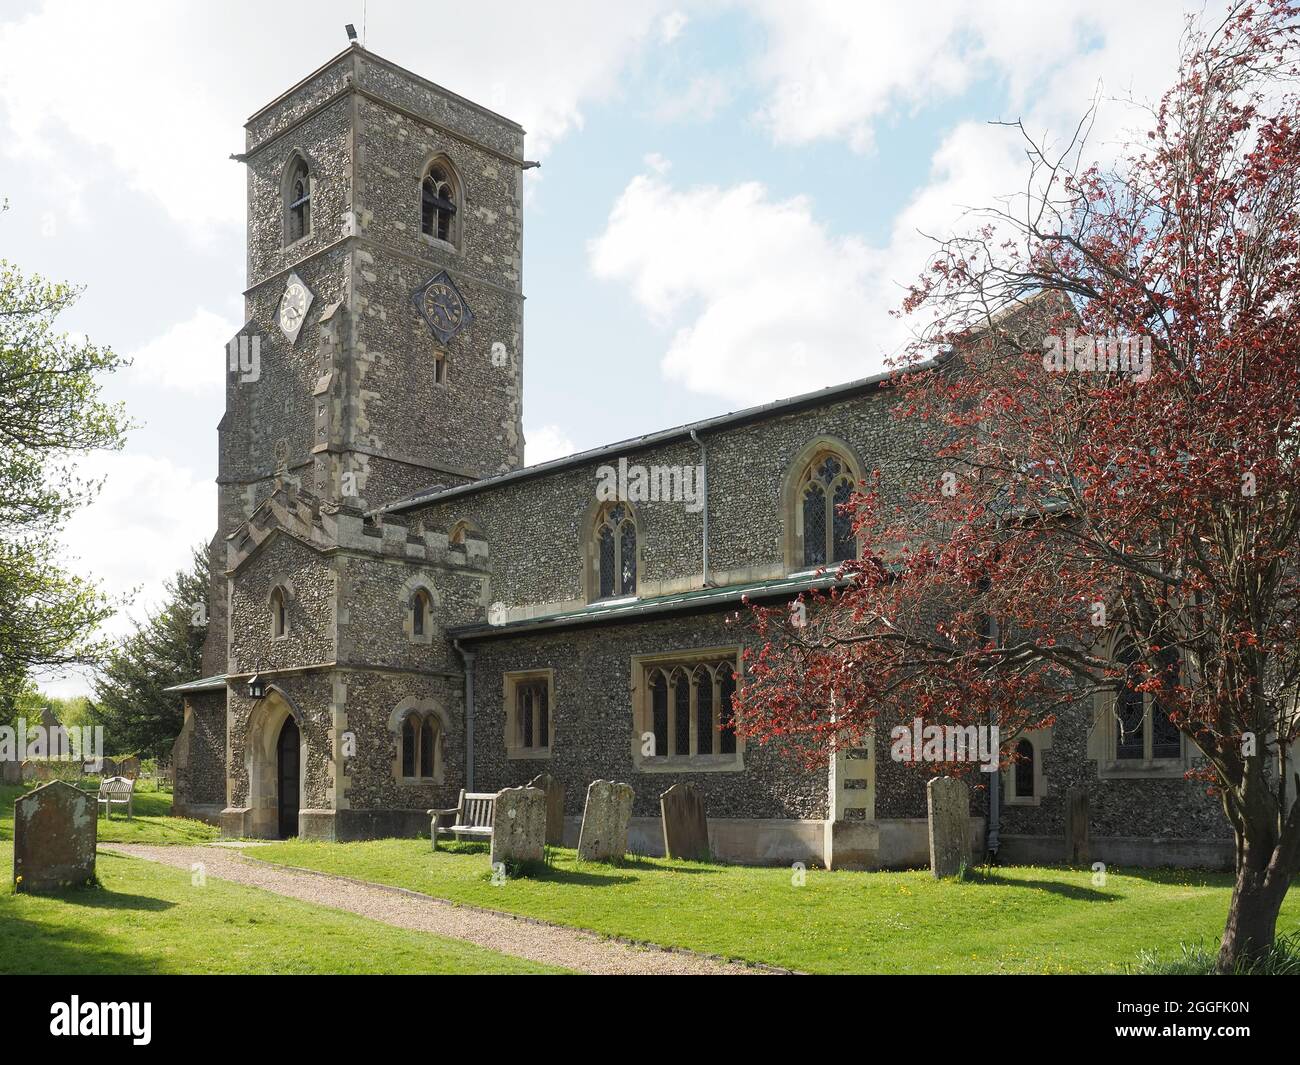 View of St John the Baptist Church in the Village of Aldbury in Hertfordshire UK Stock Photo